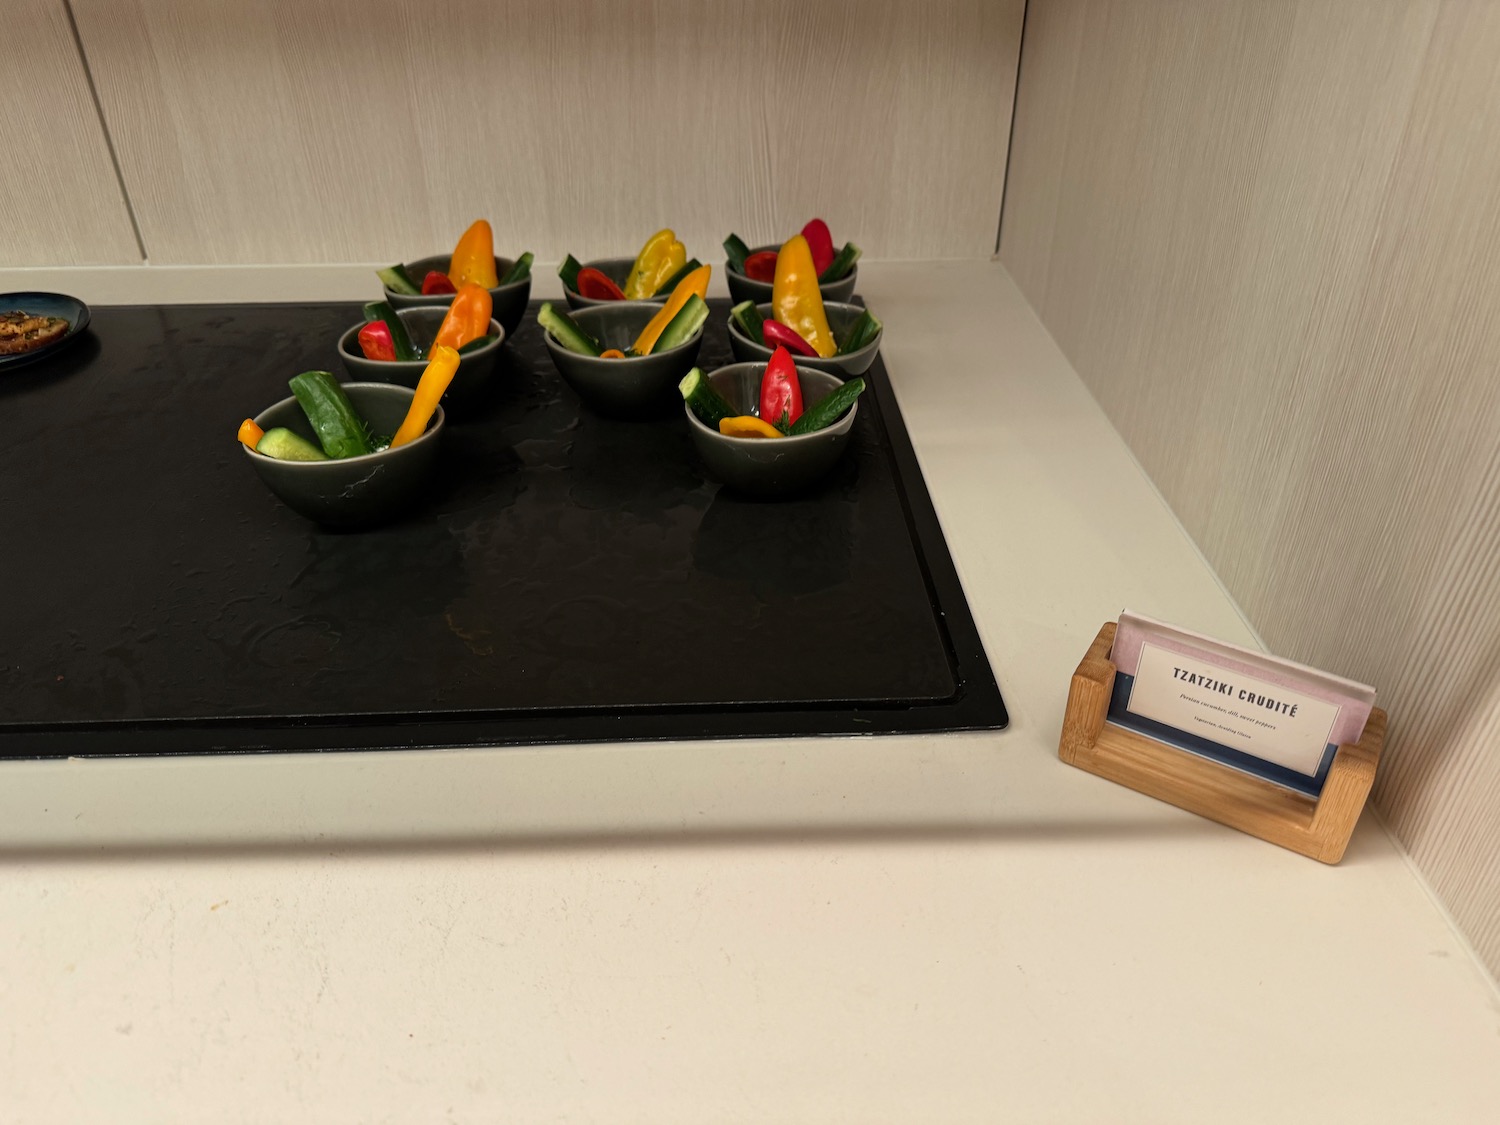 a group of small bowls of vegetables on a black surface